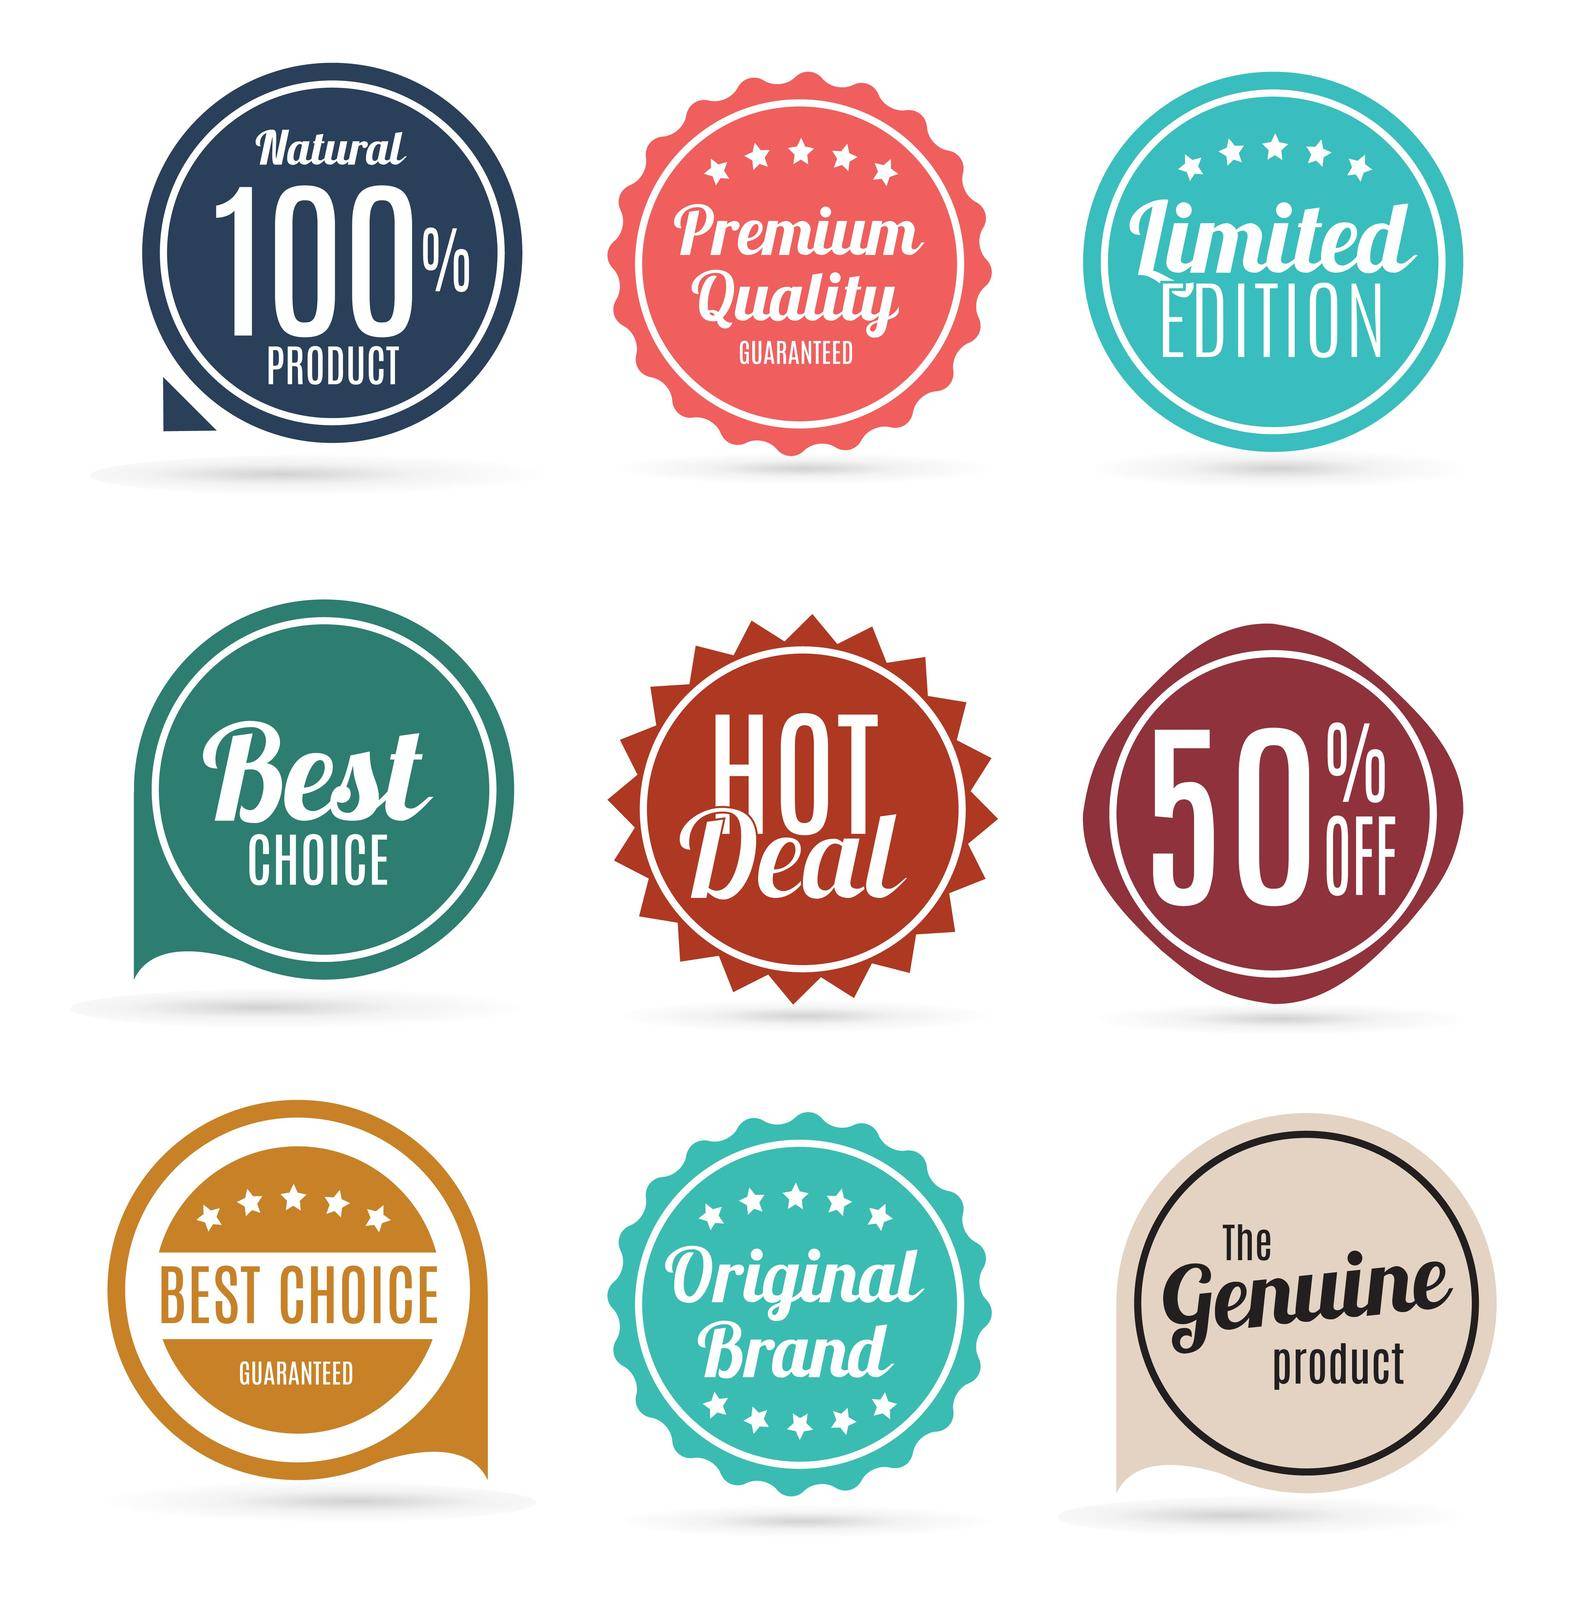 Sale and Product Quality Label Set  in Retro Colors Vector Illustration EPS10